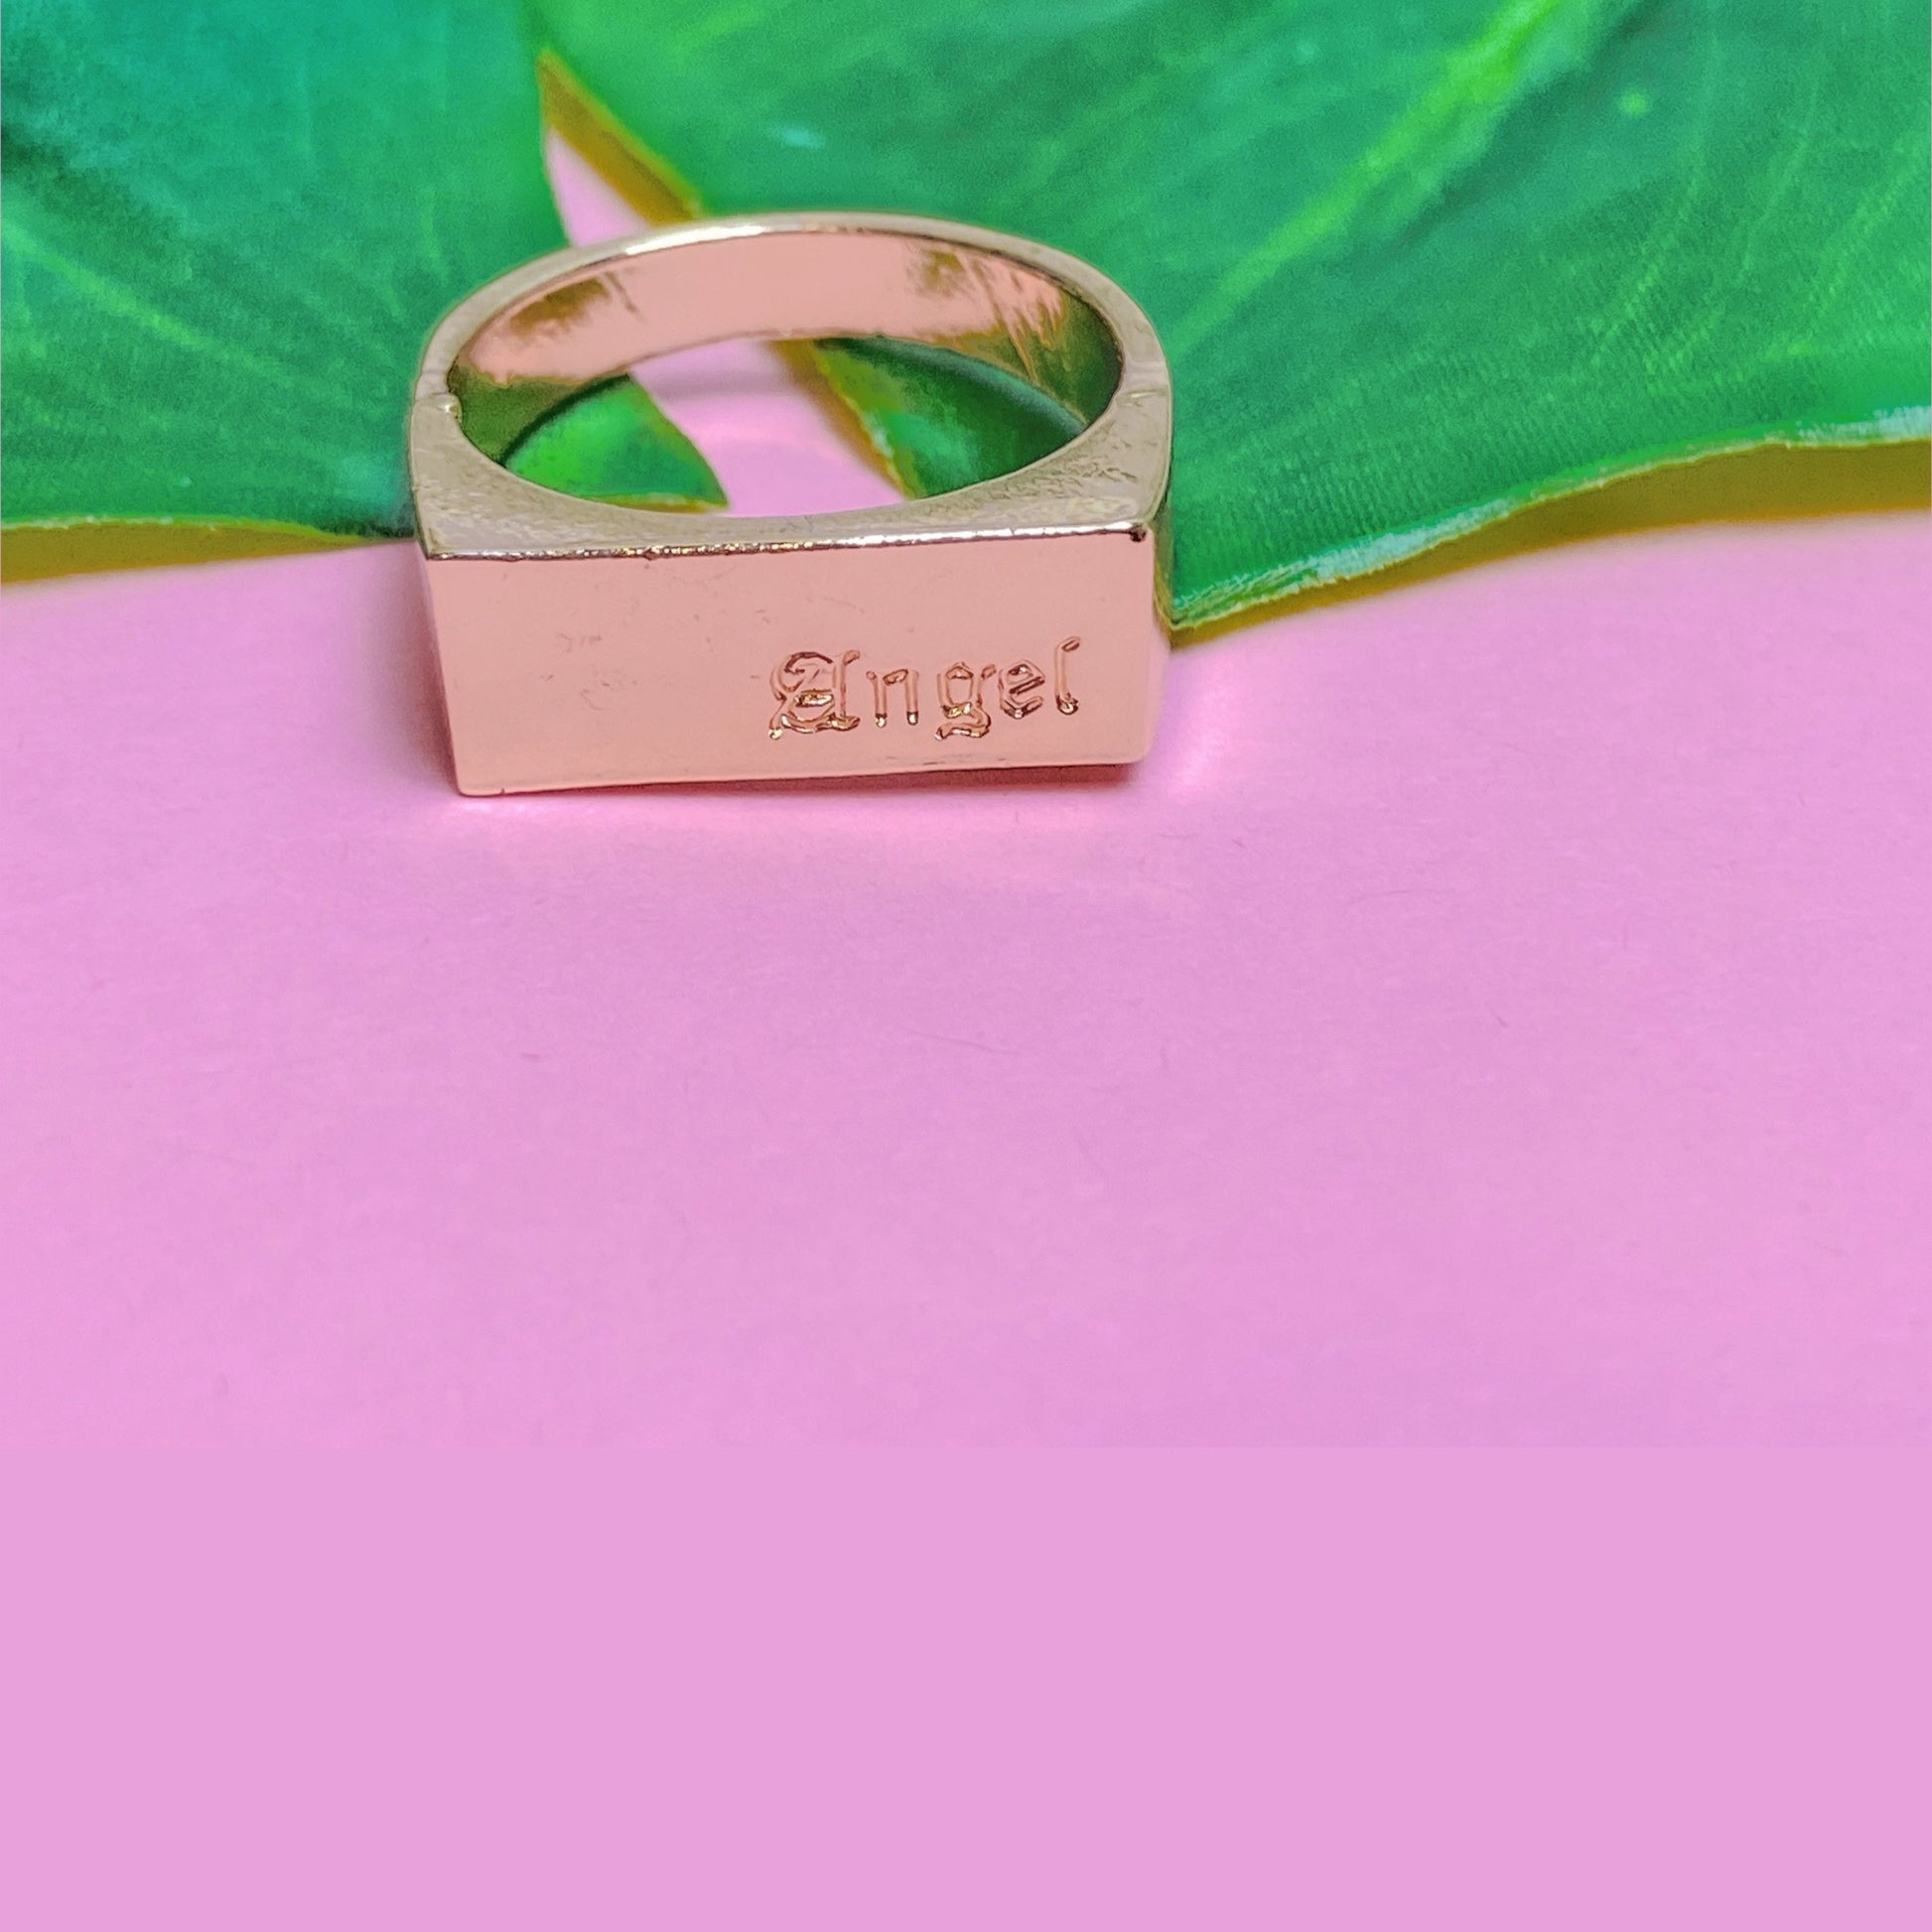 Gold engraved ring